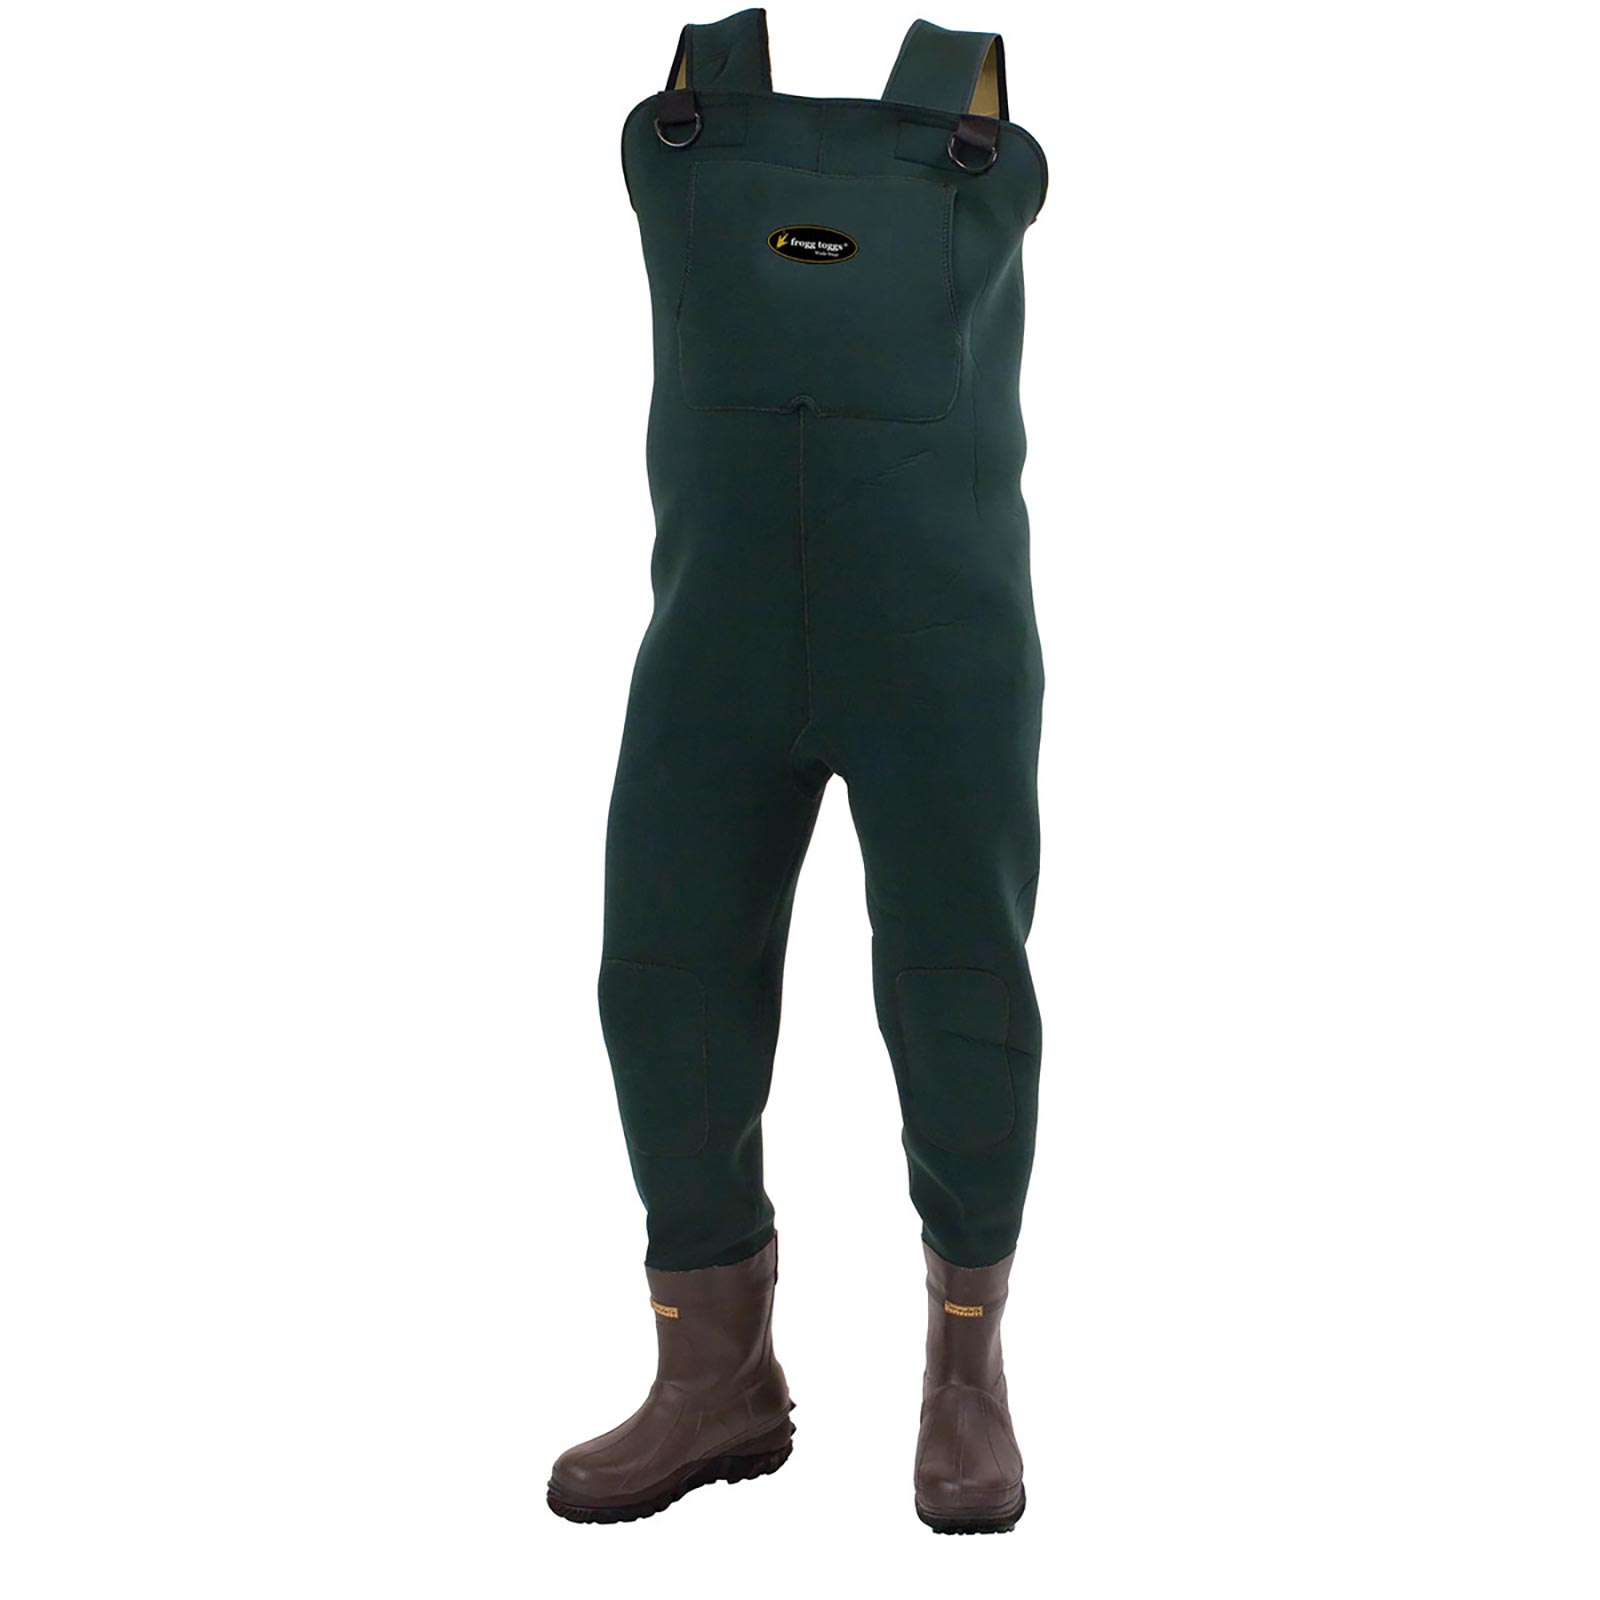 Frogg Toggs Amphib Btft Neoprene Chest Wader Cleated Green - 10